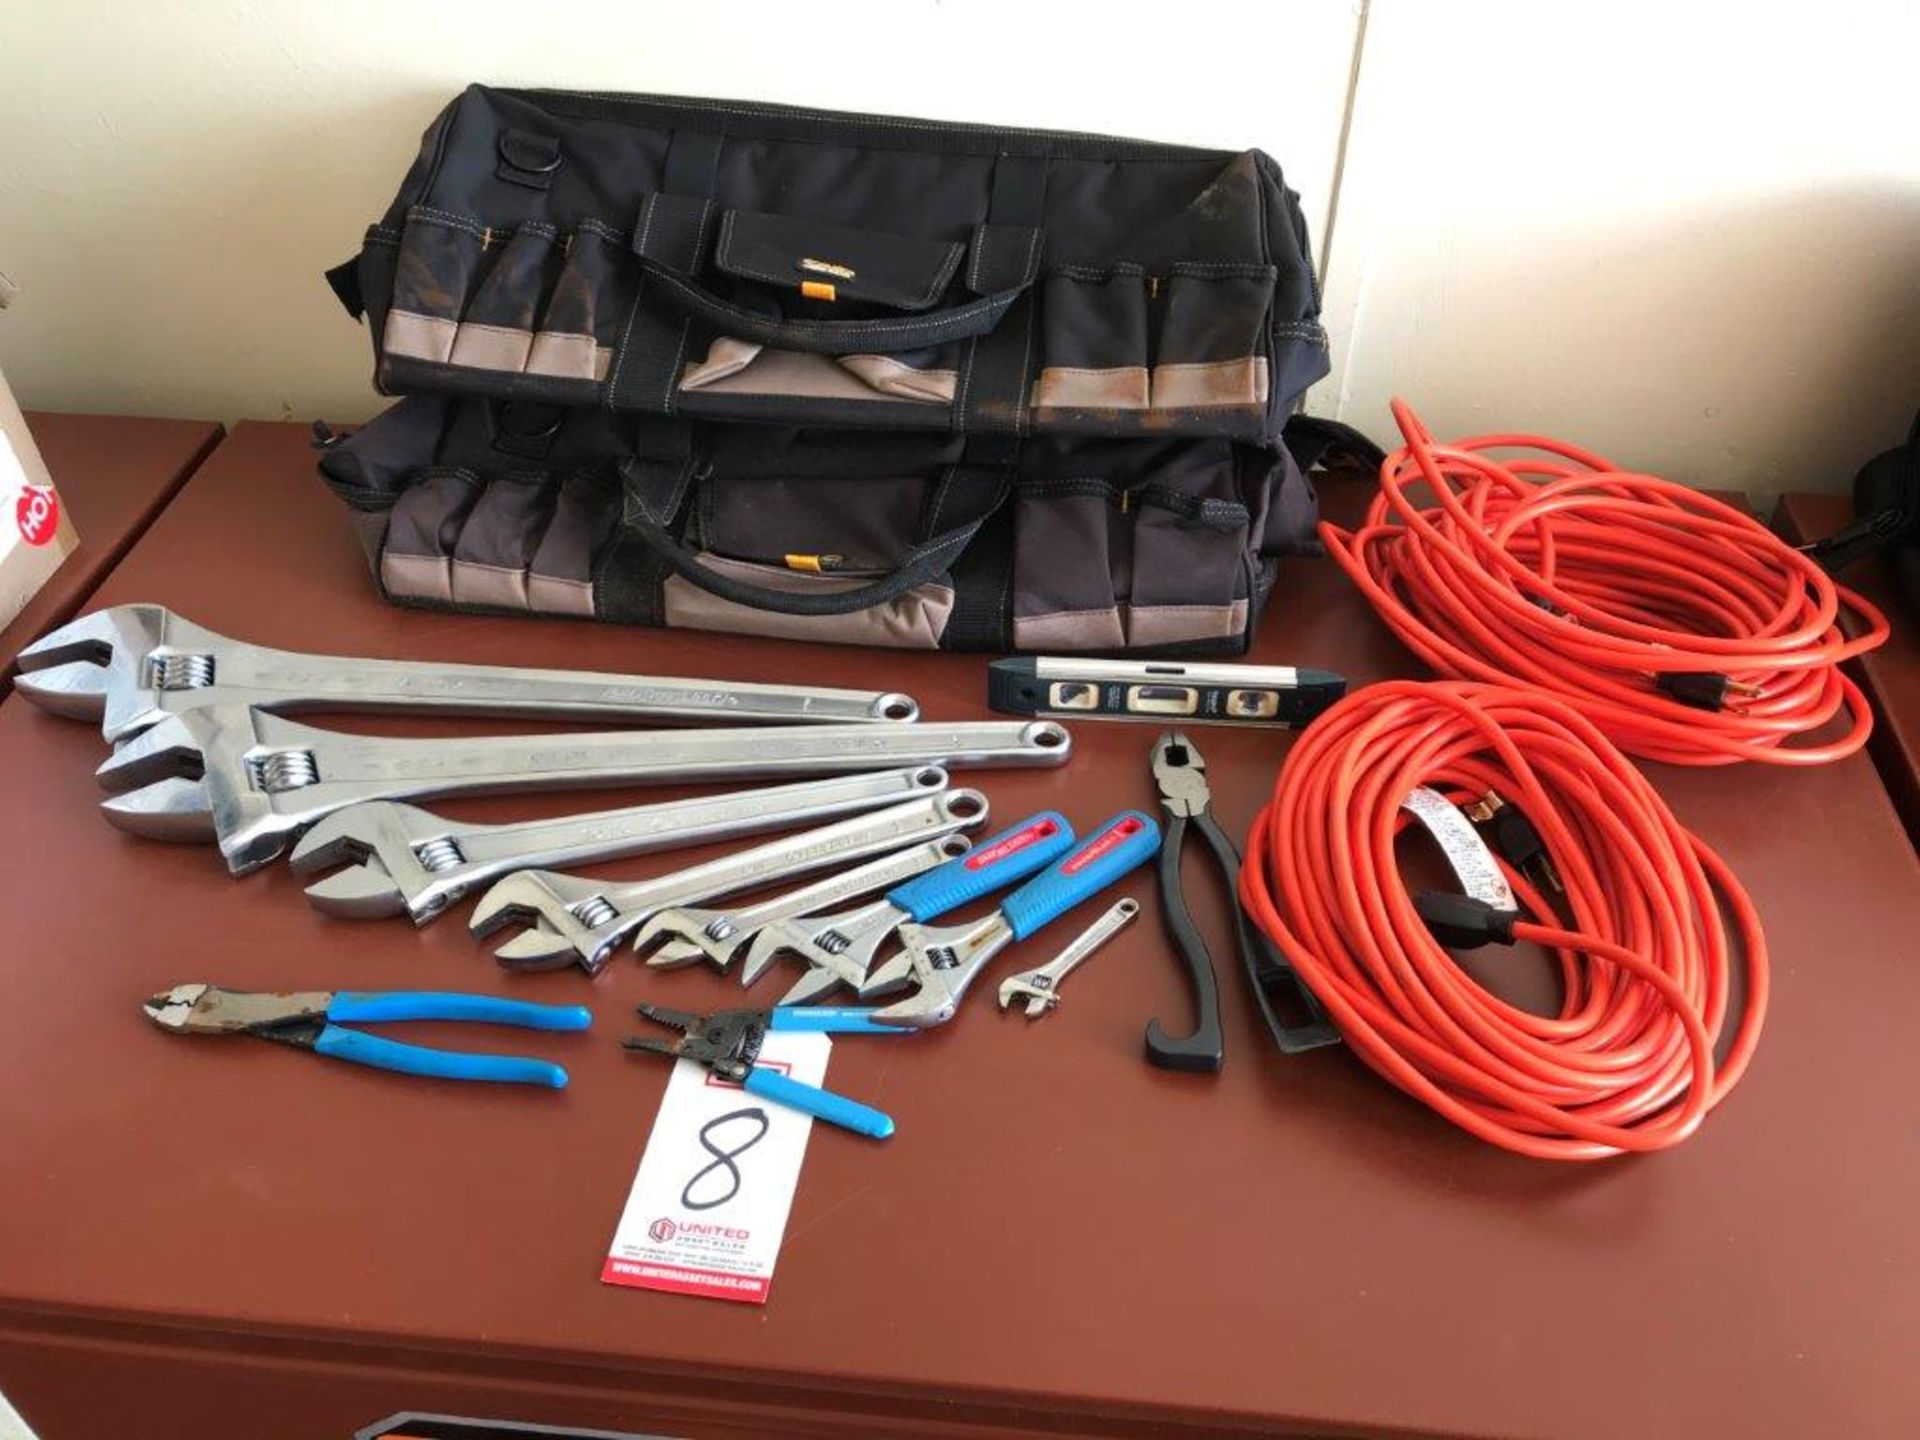 LOT - ASSORTED HAND TOOLS, TO INCLUDE: ADJUSTABLE WRENCHES, CUTTING TOOLS, EXTENSION CORDS, (2) TOOL